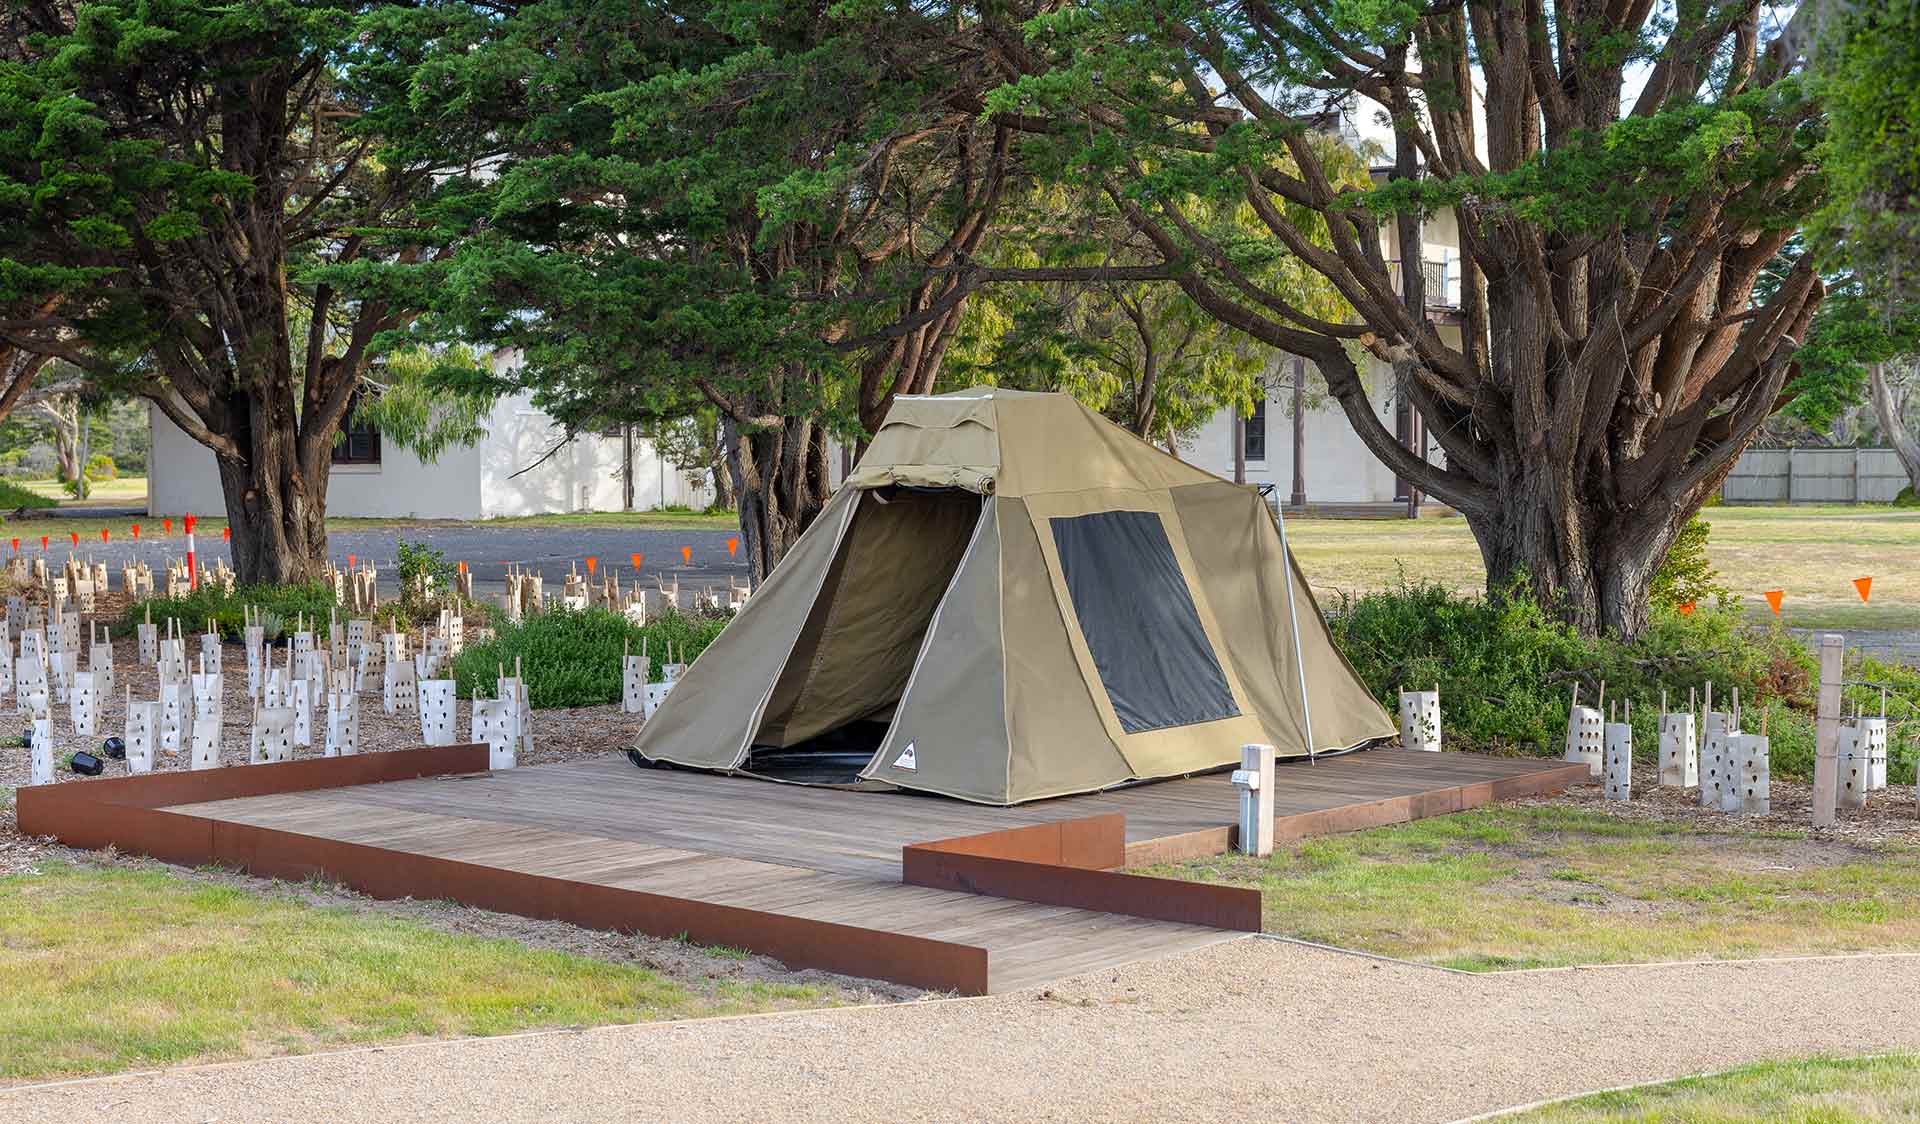 A tent set up on wood flooring in a coastal landscape. A ramp leads to the entrance.